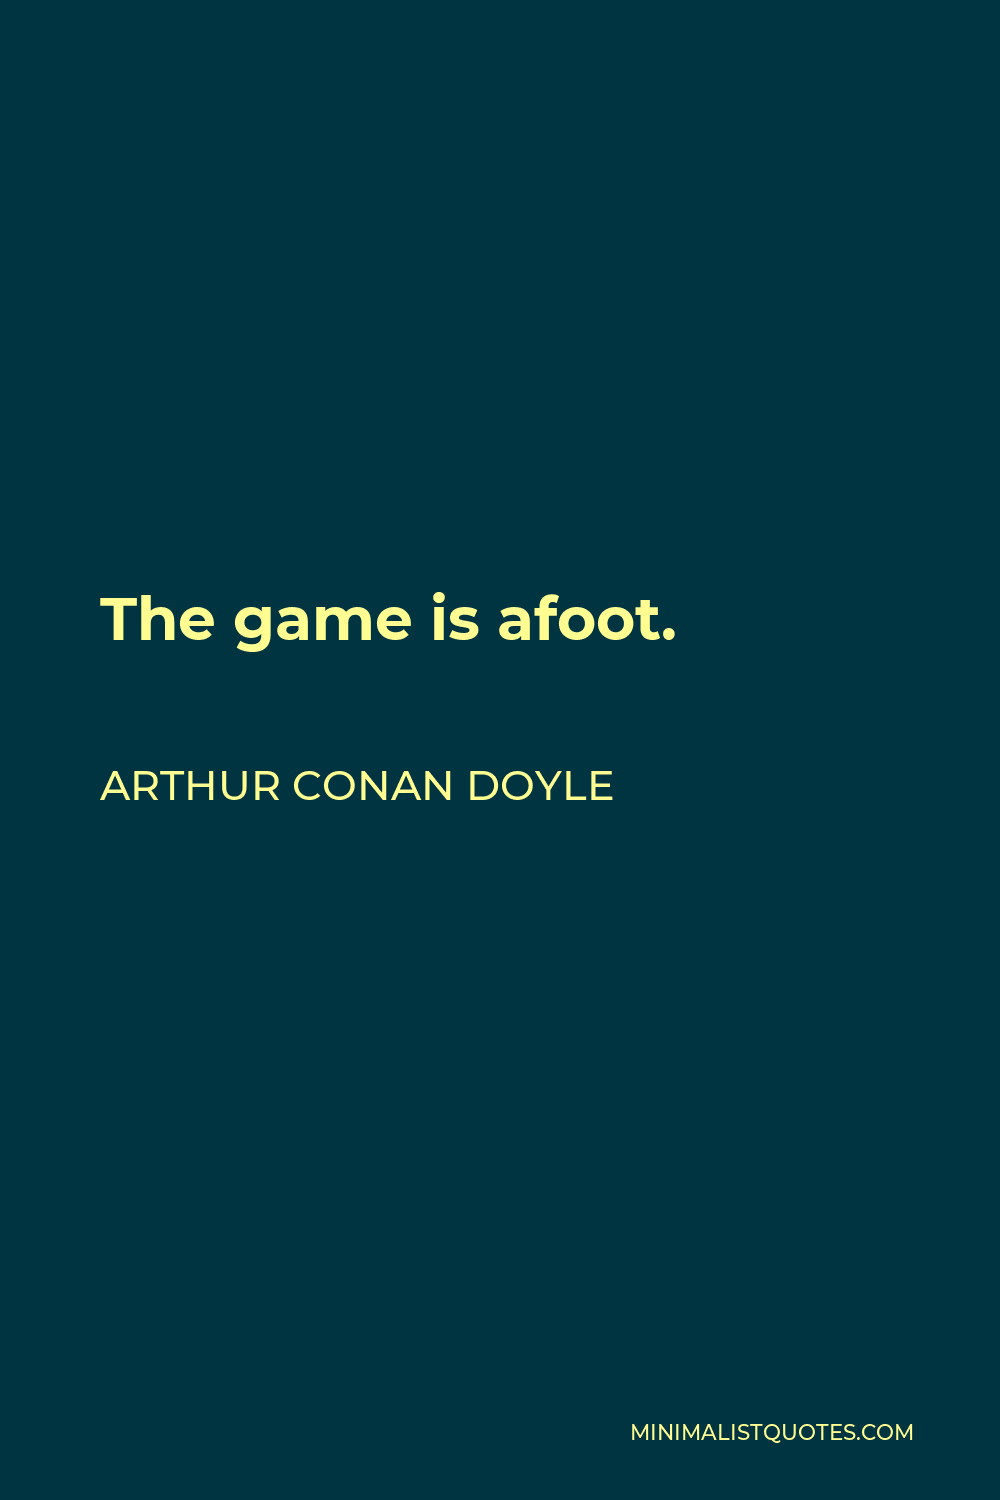 Arthur Conan Doyle Quote - The game is afoot.